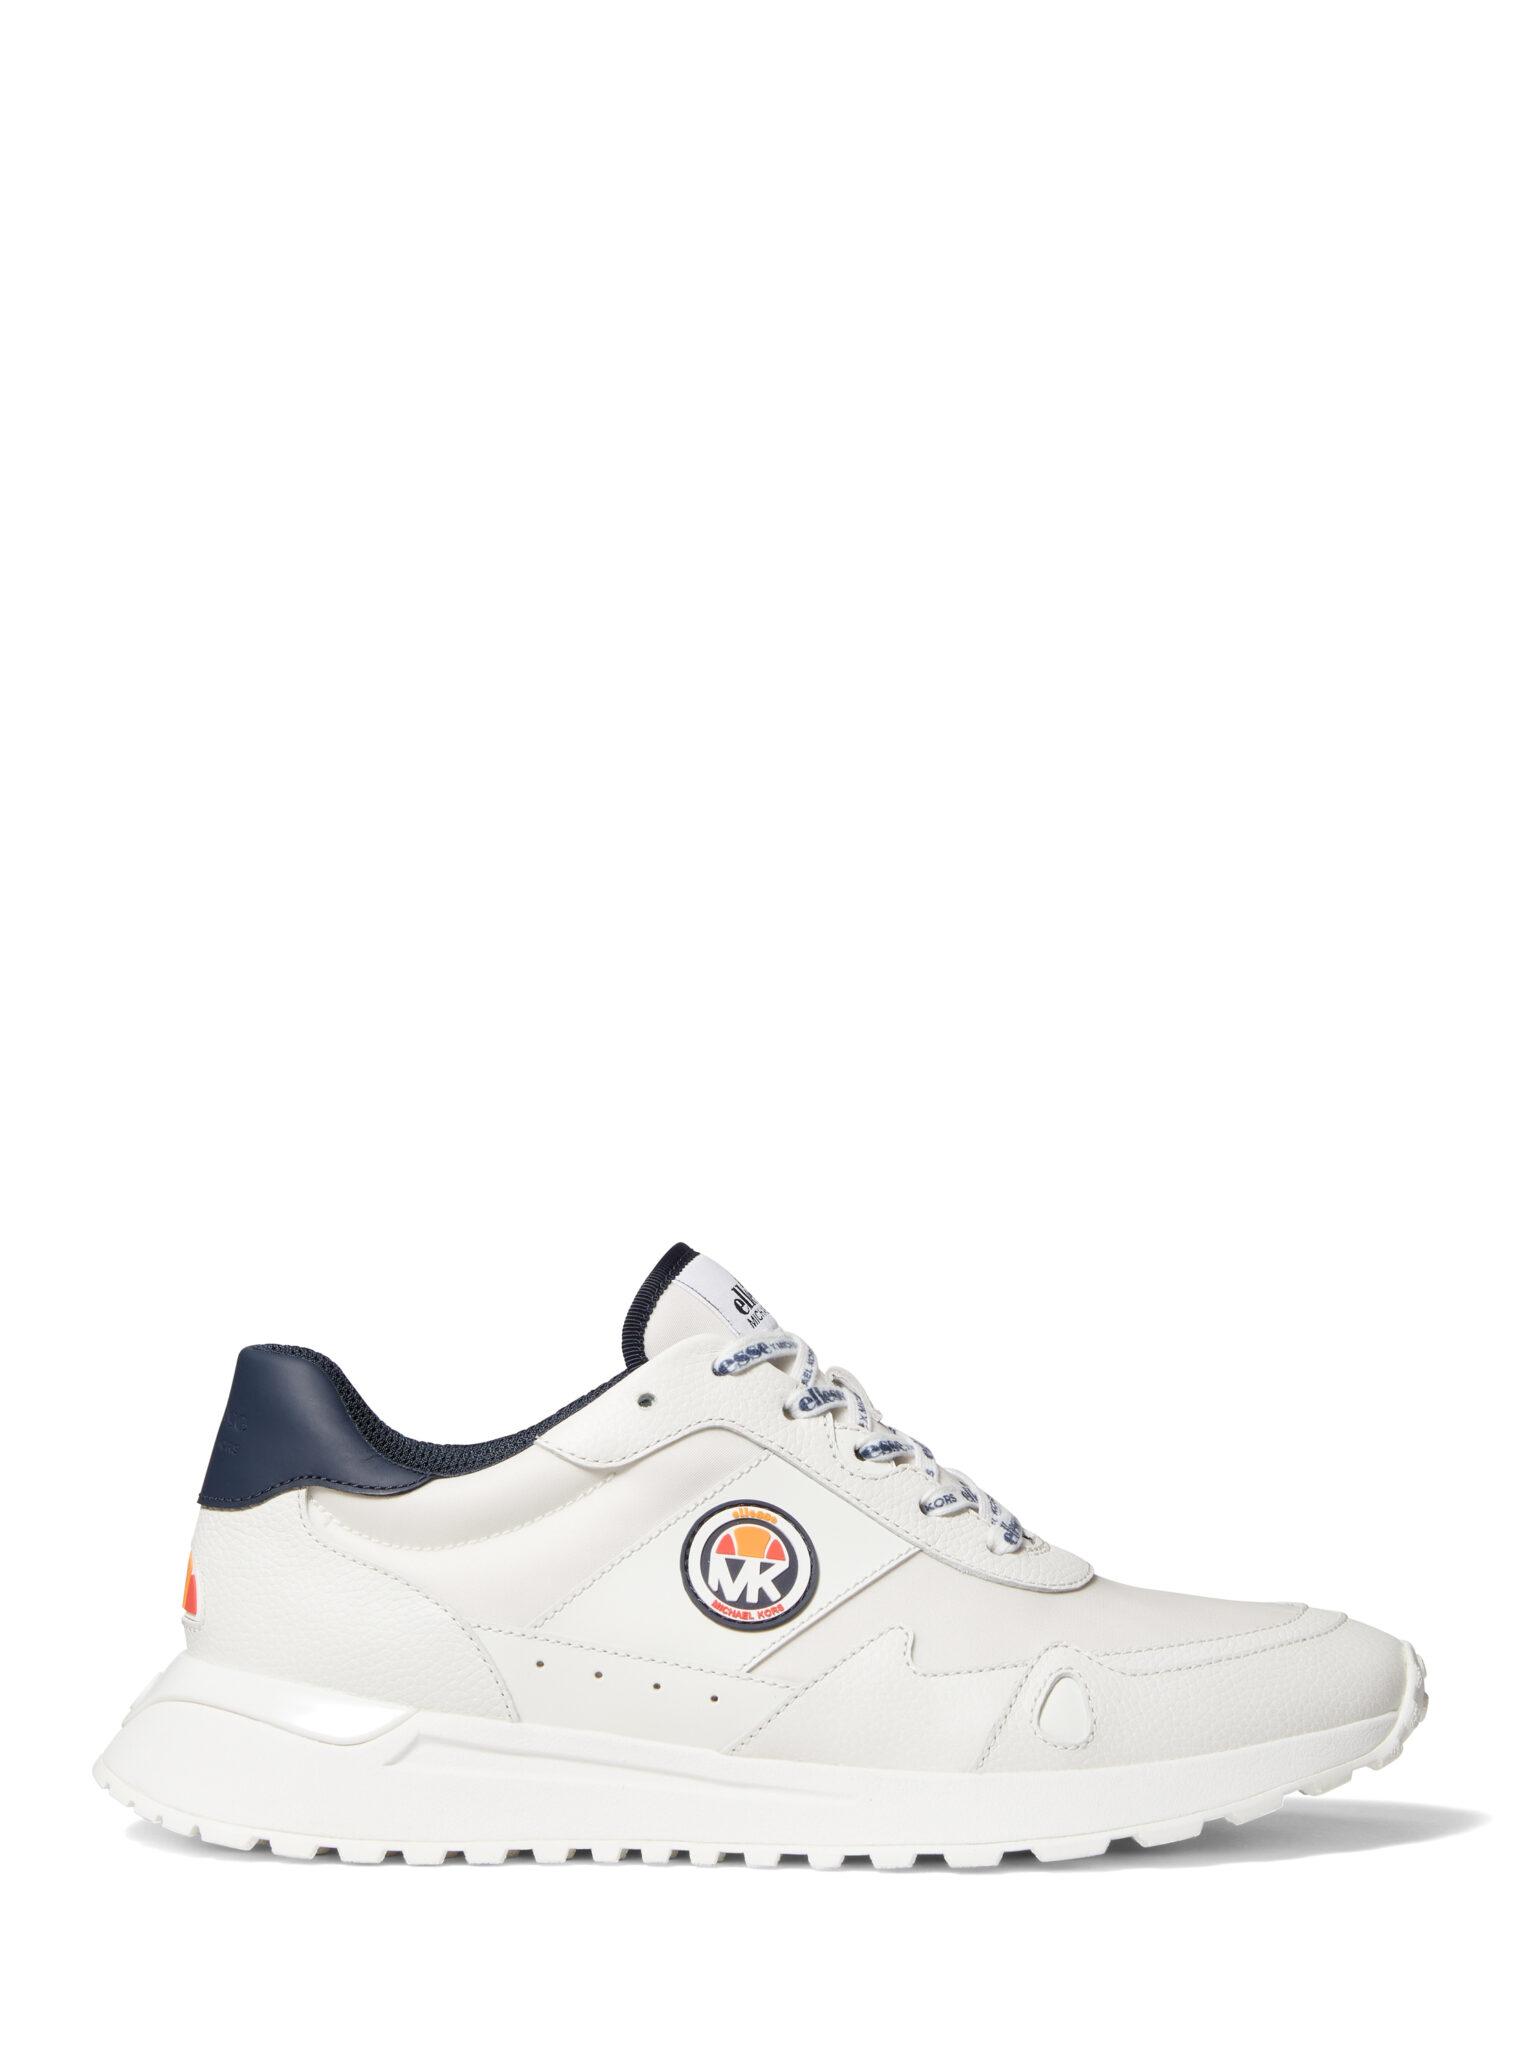 PRESENTING MICHAEL KORS X ELLESSE:AN ICONIC PAIRING OF TWO POWERHOUSE ...